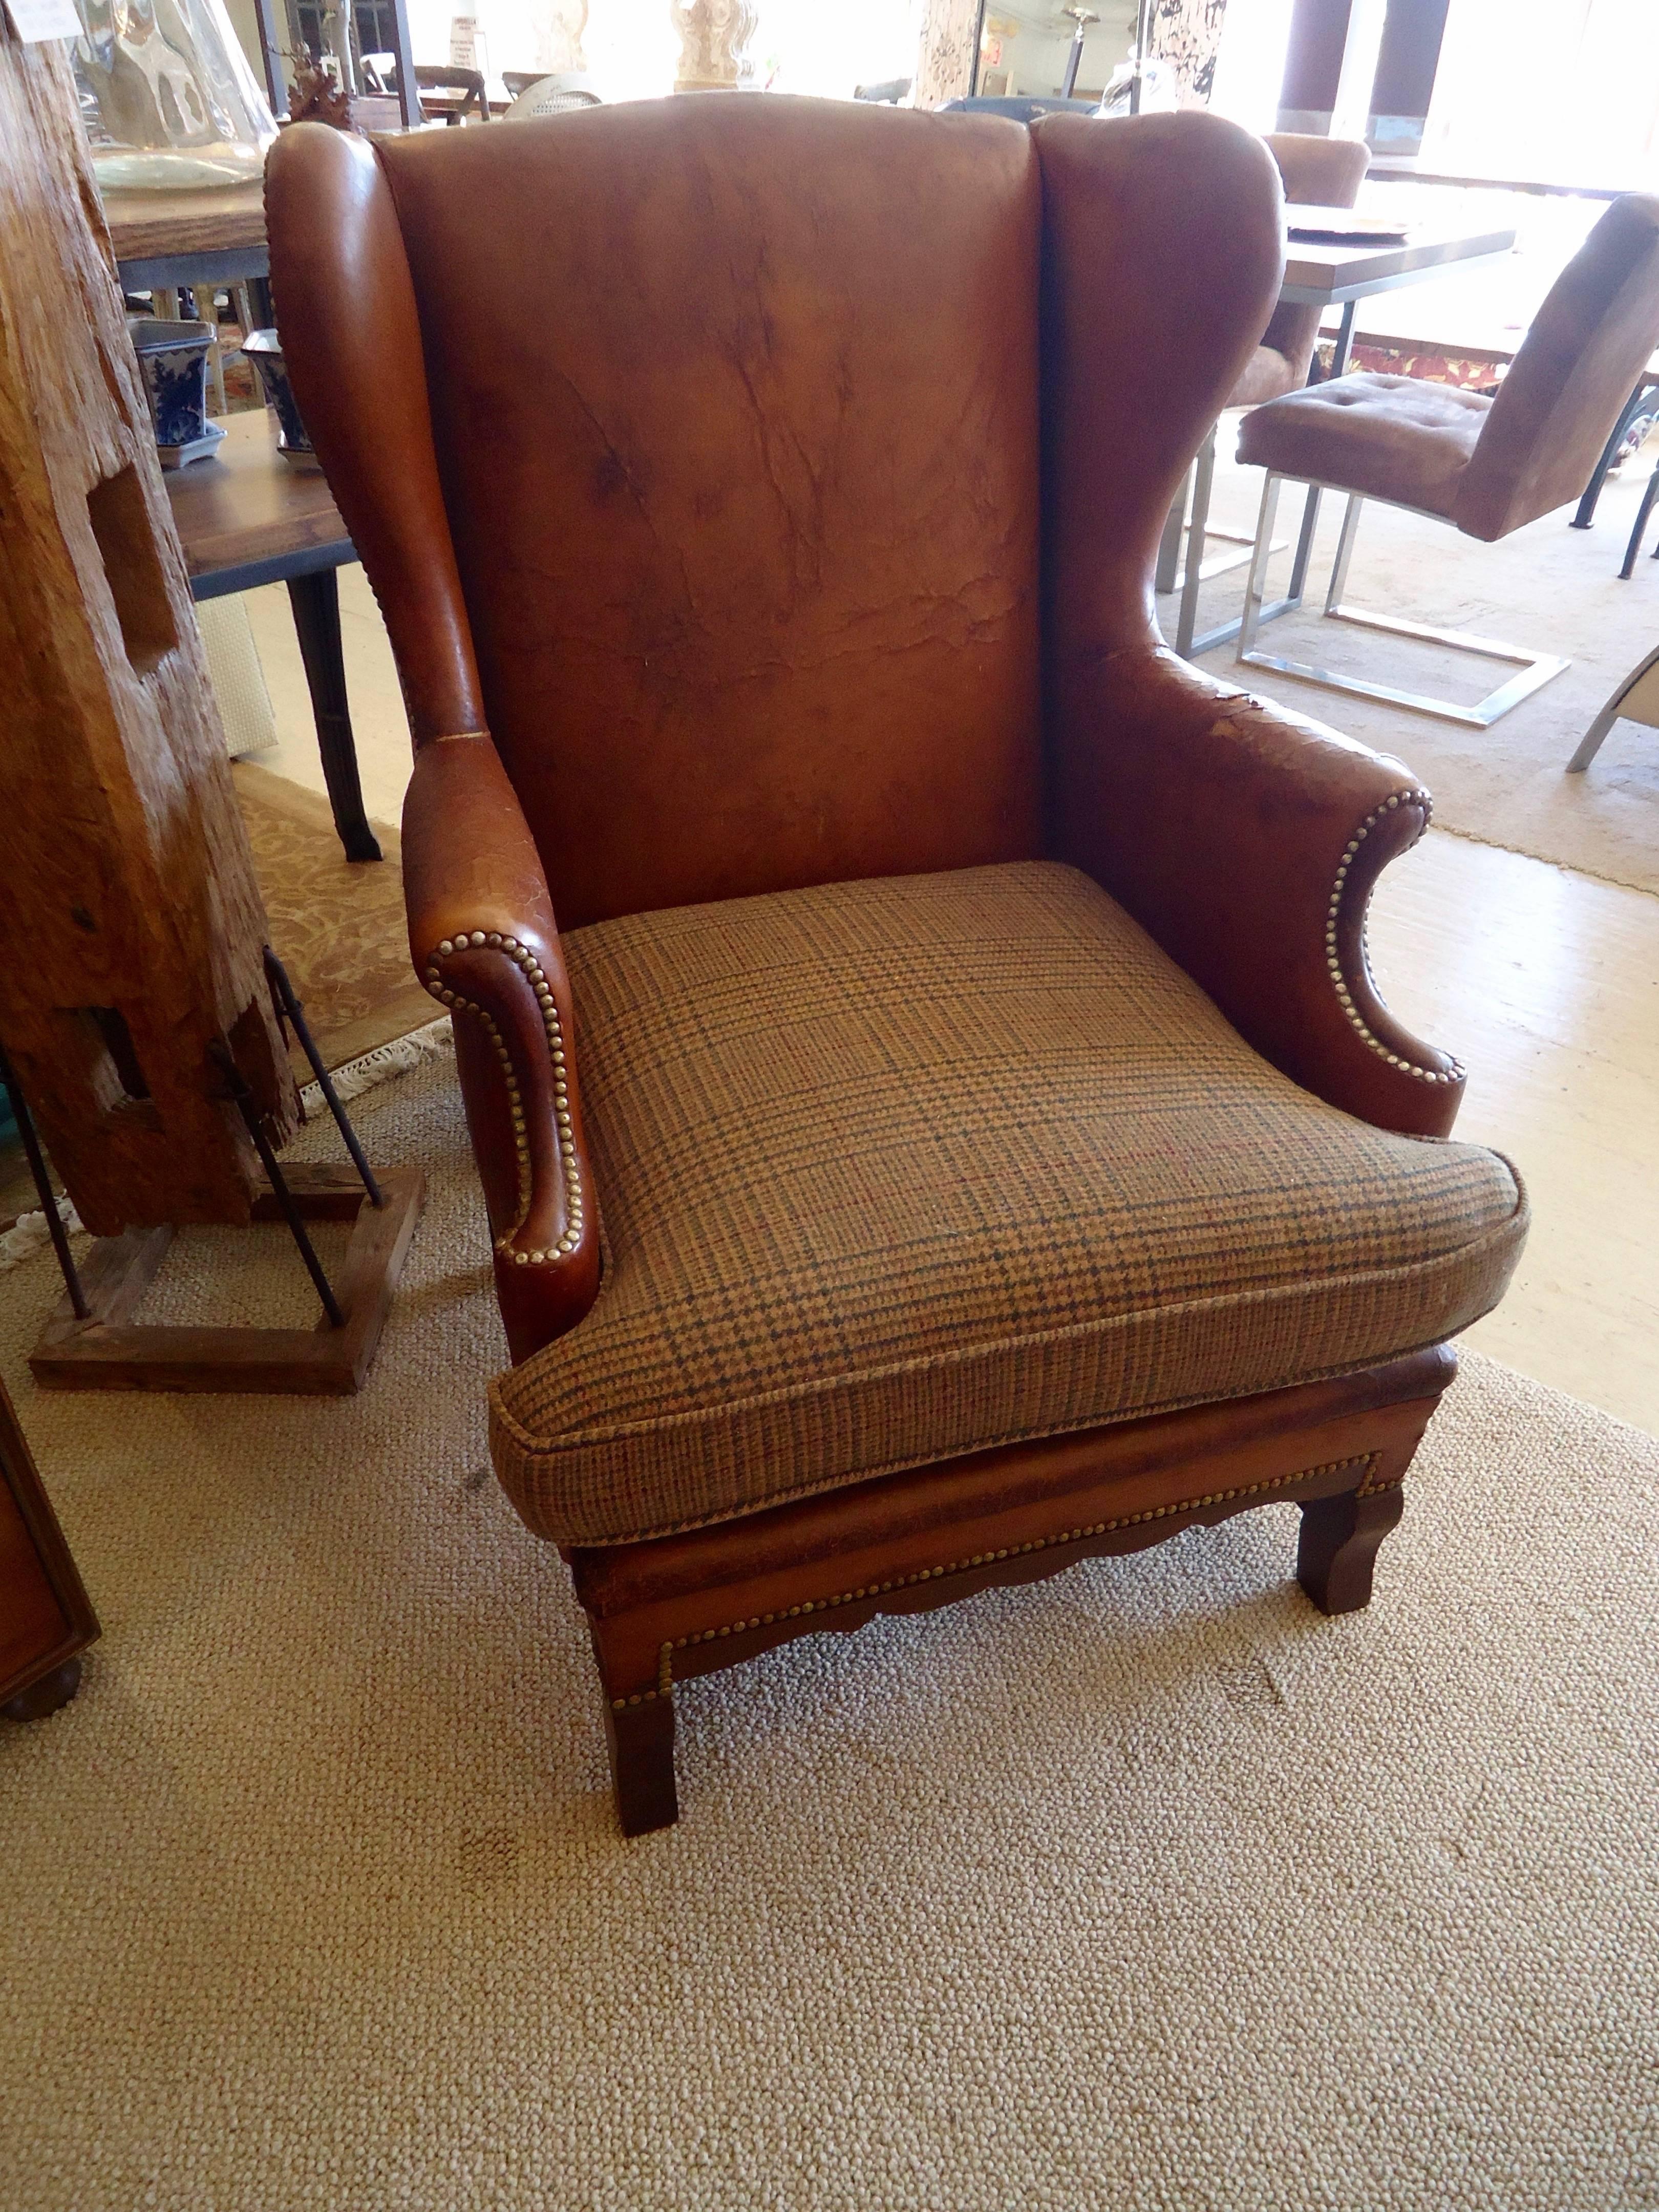 Distressed early 19th century leather wing chair with mahogany base, brass nailheads and a newly upholstered Ralph Lauren wool plaid seat cushion.
Oozing with character. Measures: Seat depth 23